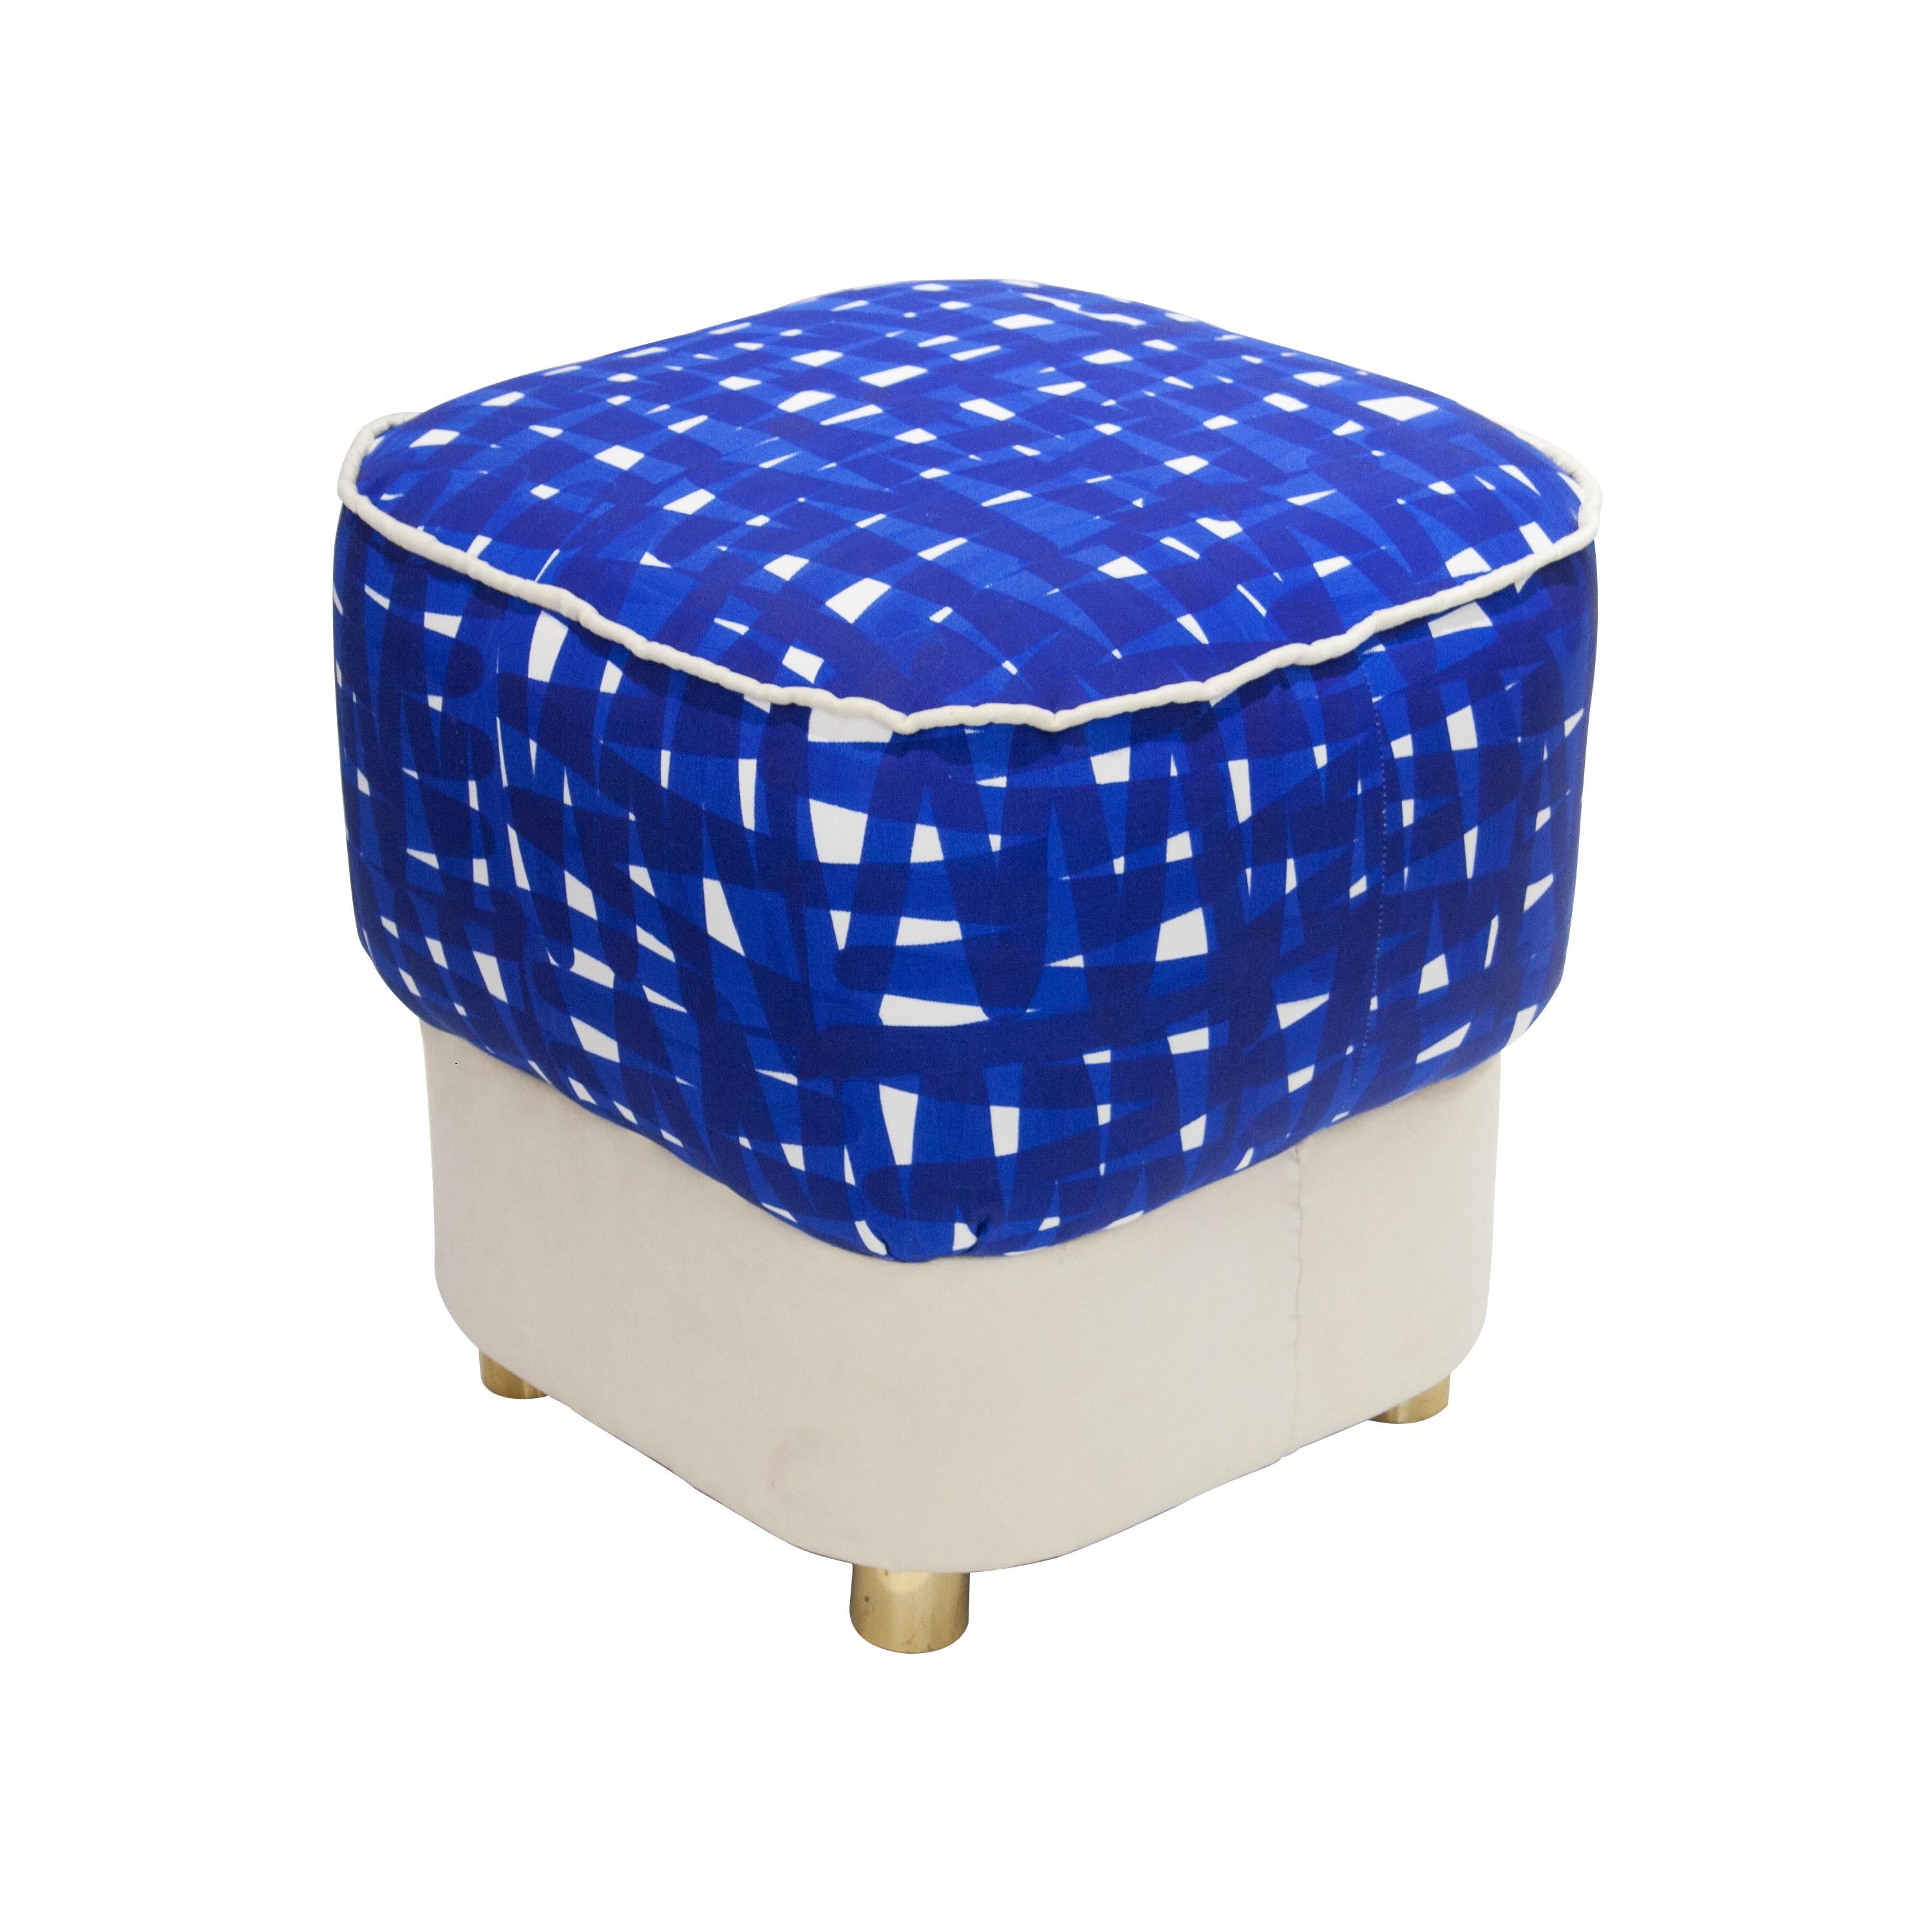 Square pouf, made of solid wood structure and white linen/wool upholstery with geometric cotton upholstery hand painted by Livio de Simone. Finished in brass legs.

*price per item